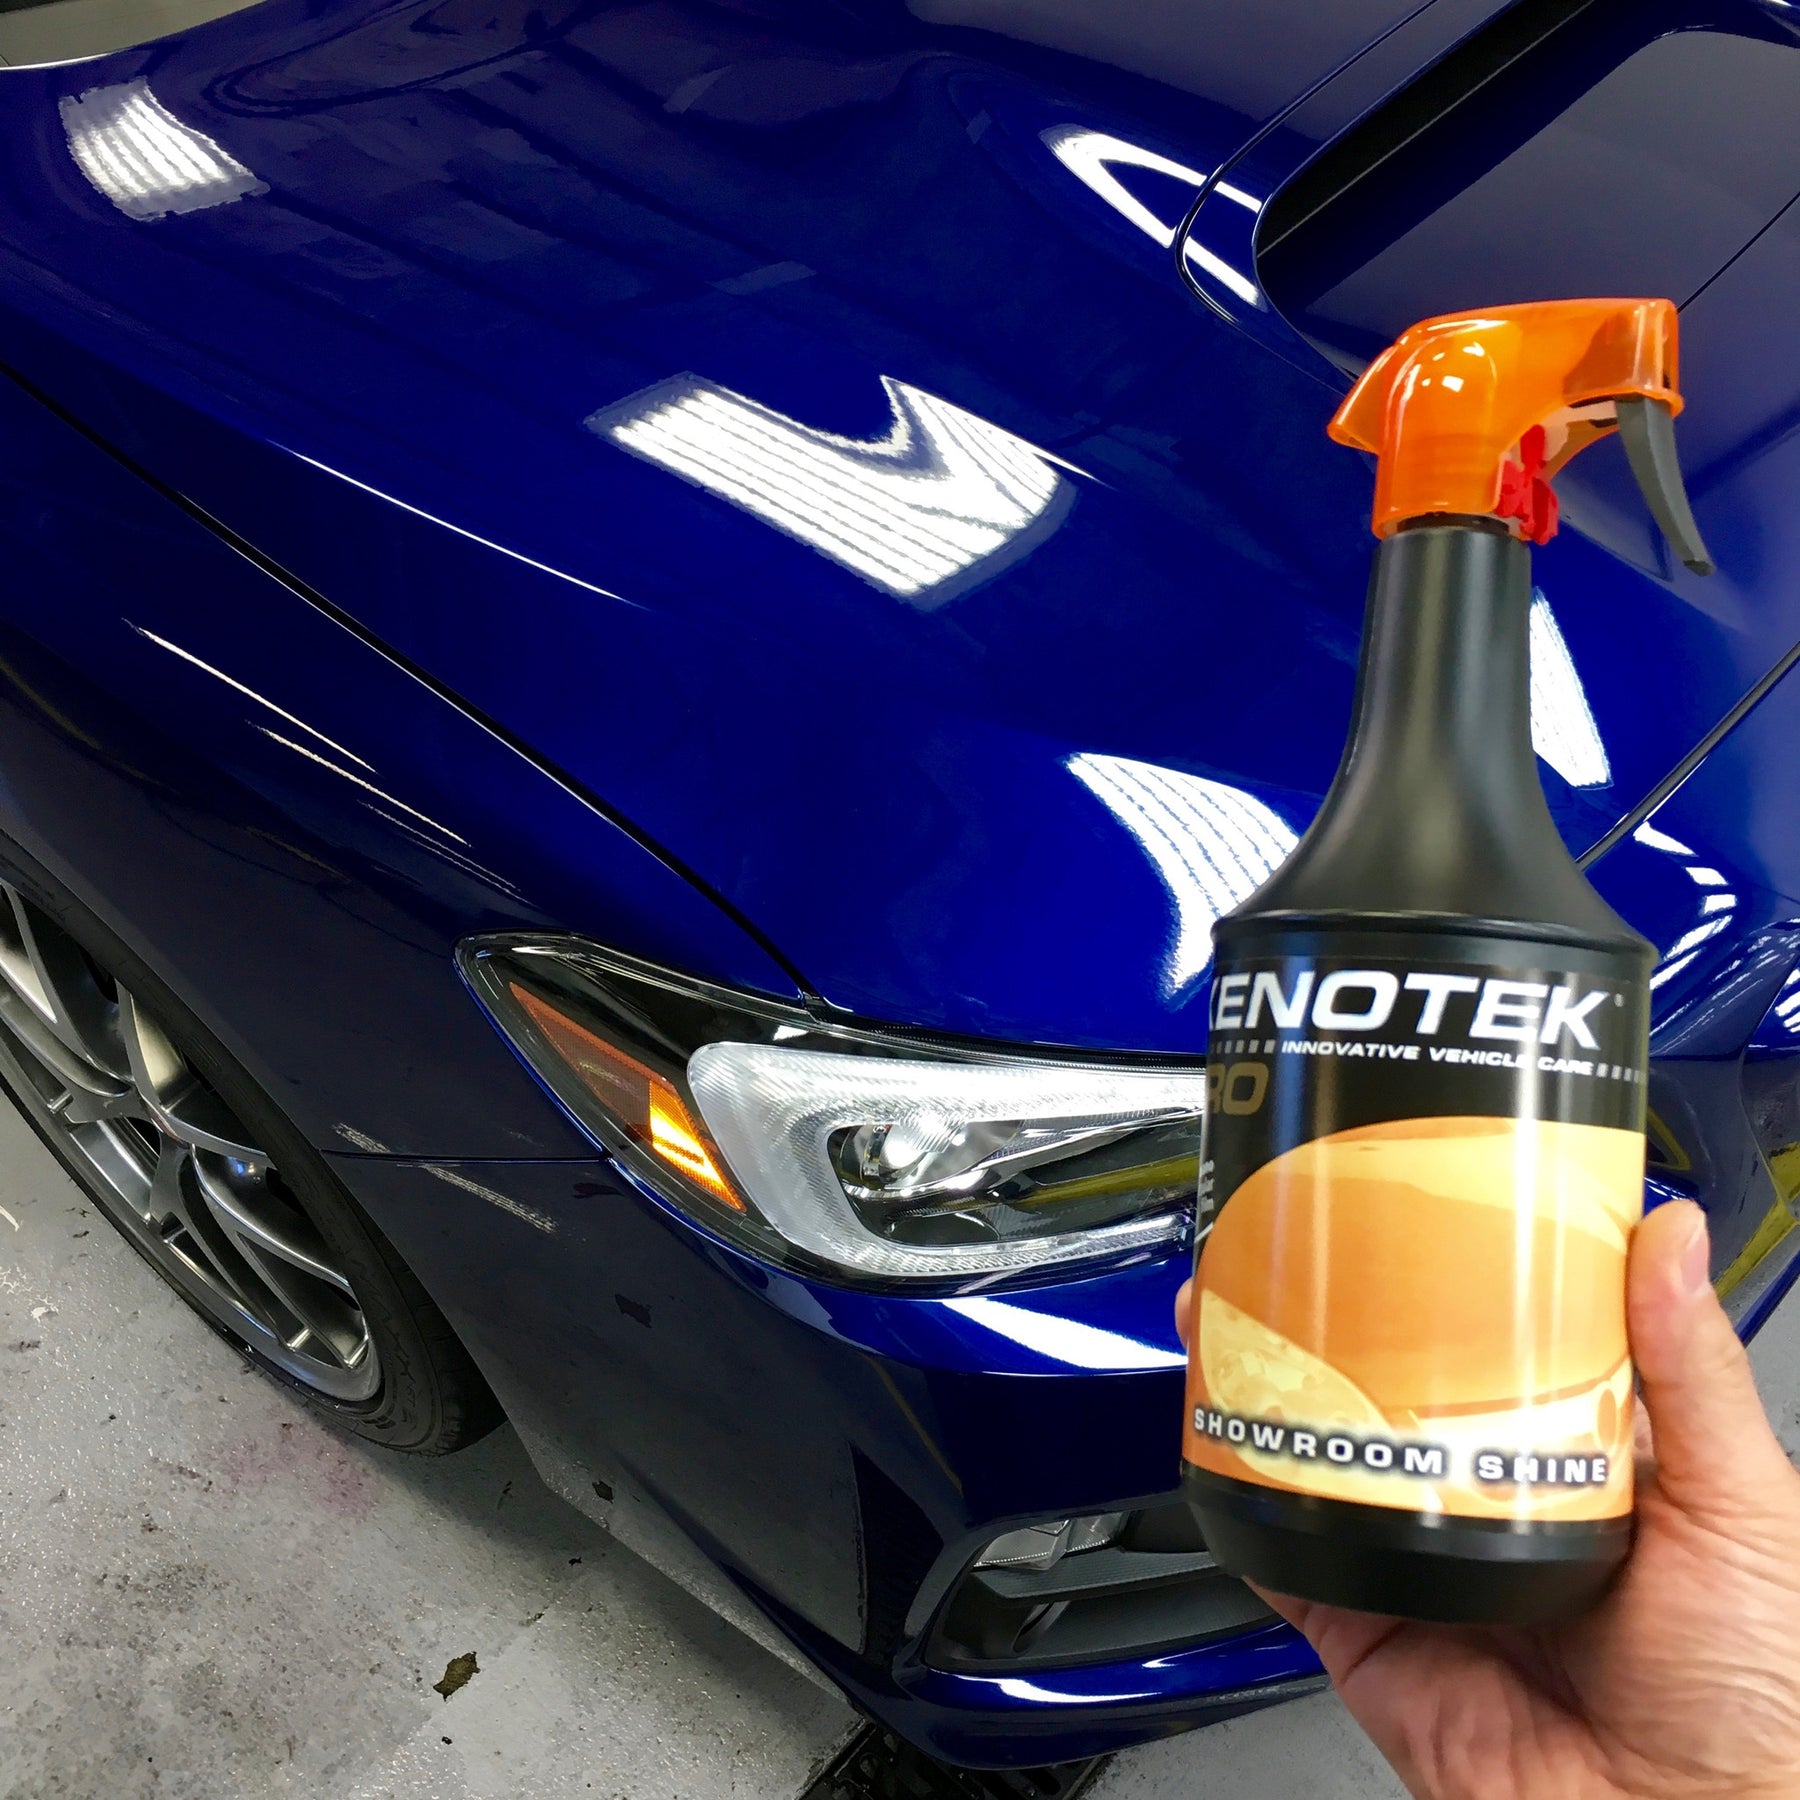 Will this be your go to Detail Spray this year? - Kenotek Showroom Shine